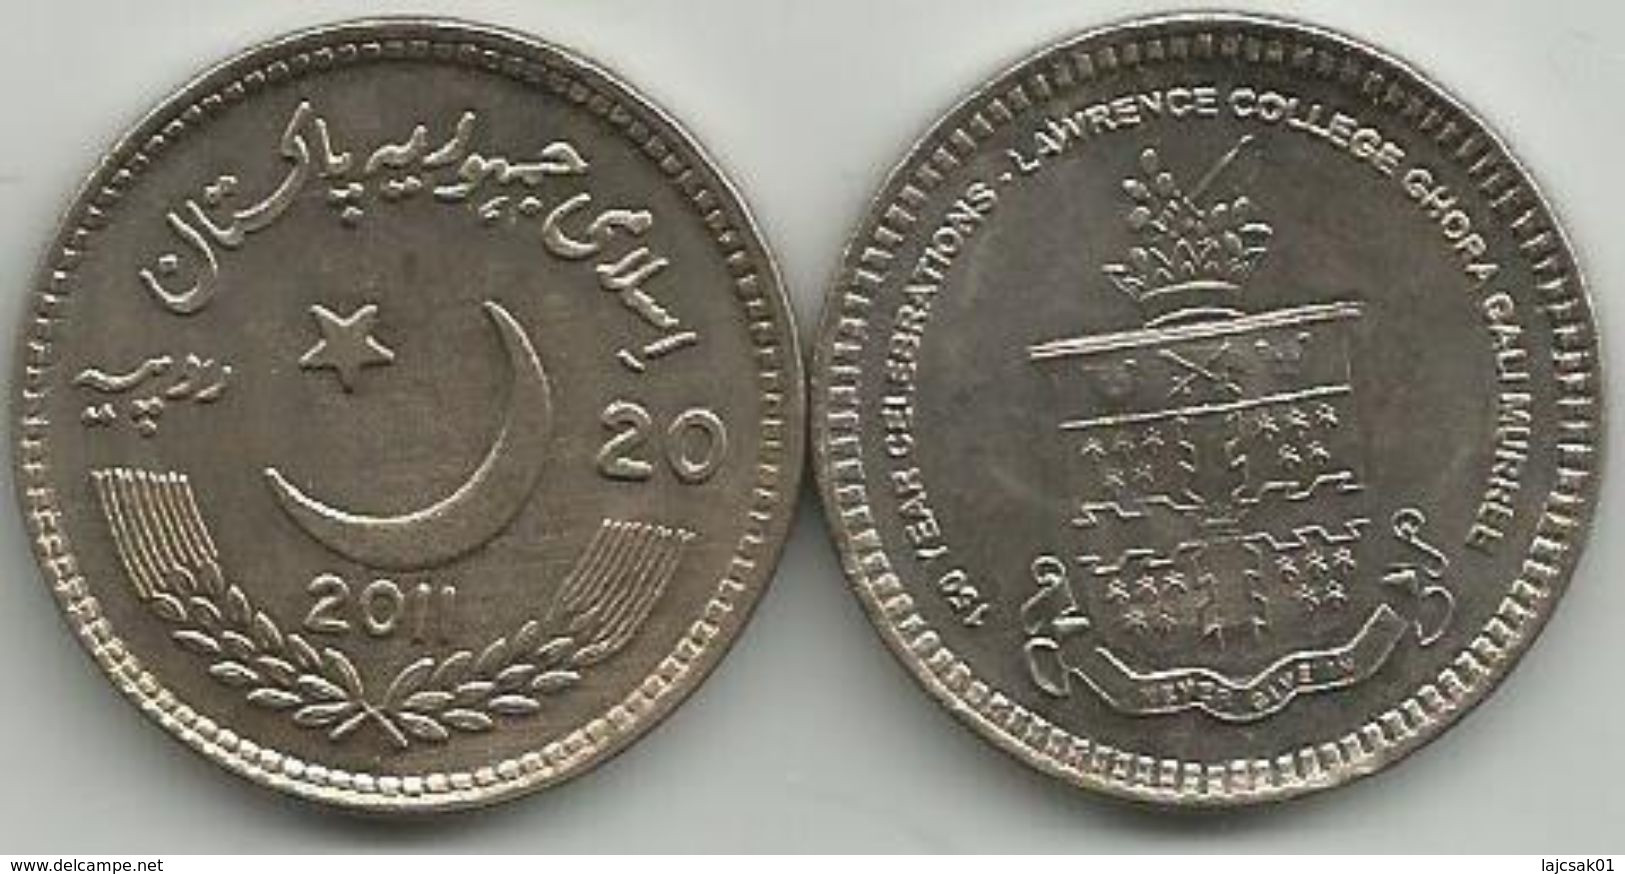 Pakistan 20 Rupees 2011. UNC KM#72  150 Years Of Lawrence College - Pakistan